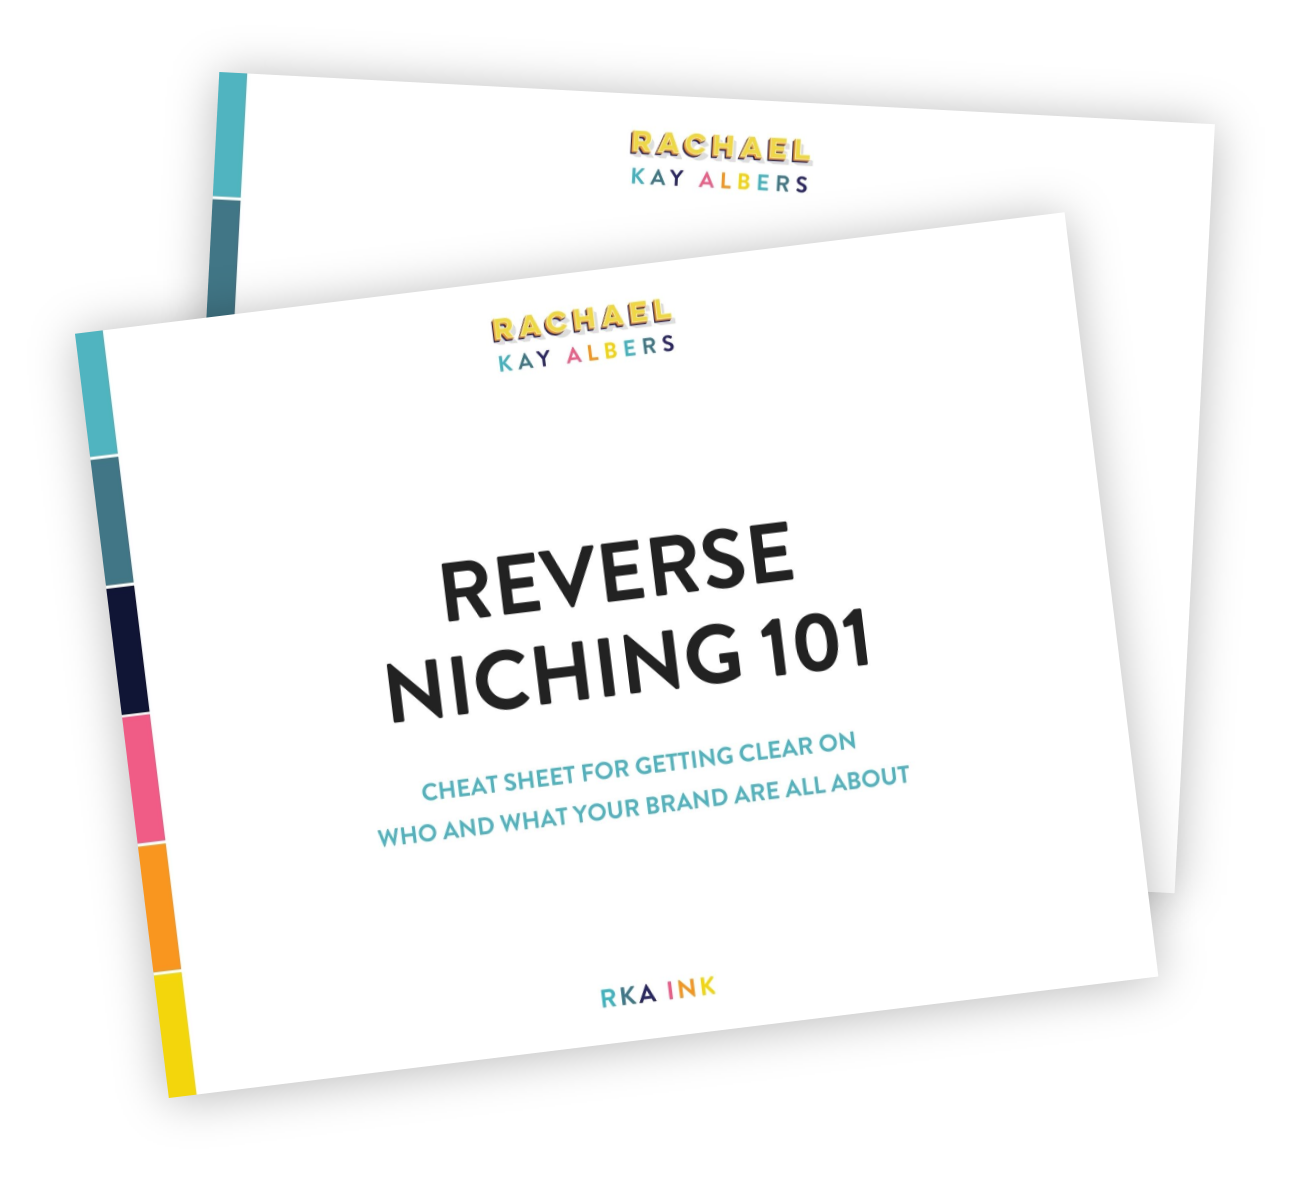 The Reverse Niching Guide to Brand Values by Rachael Kay Albers